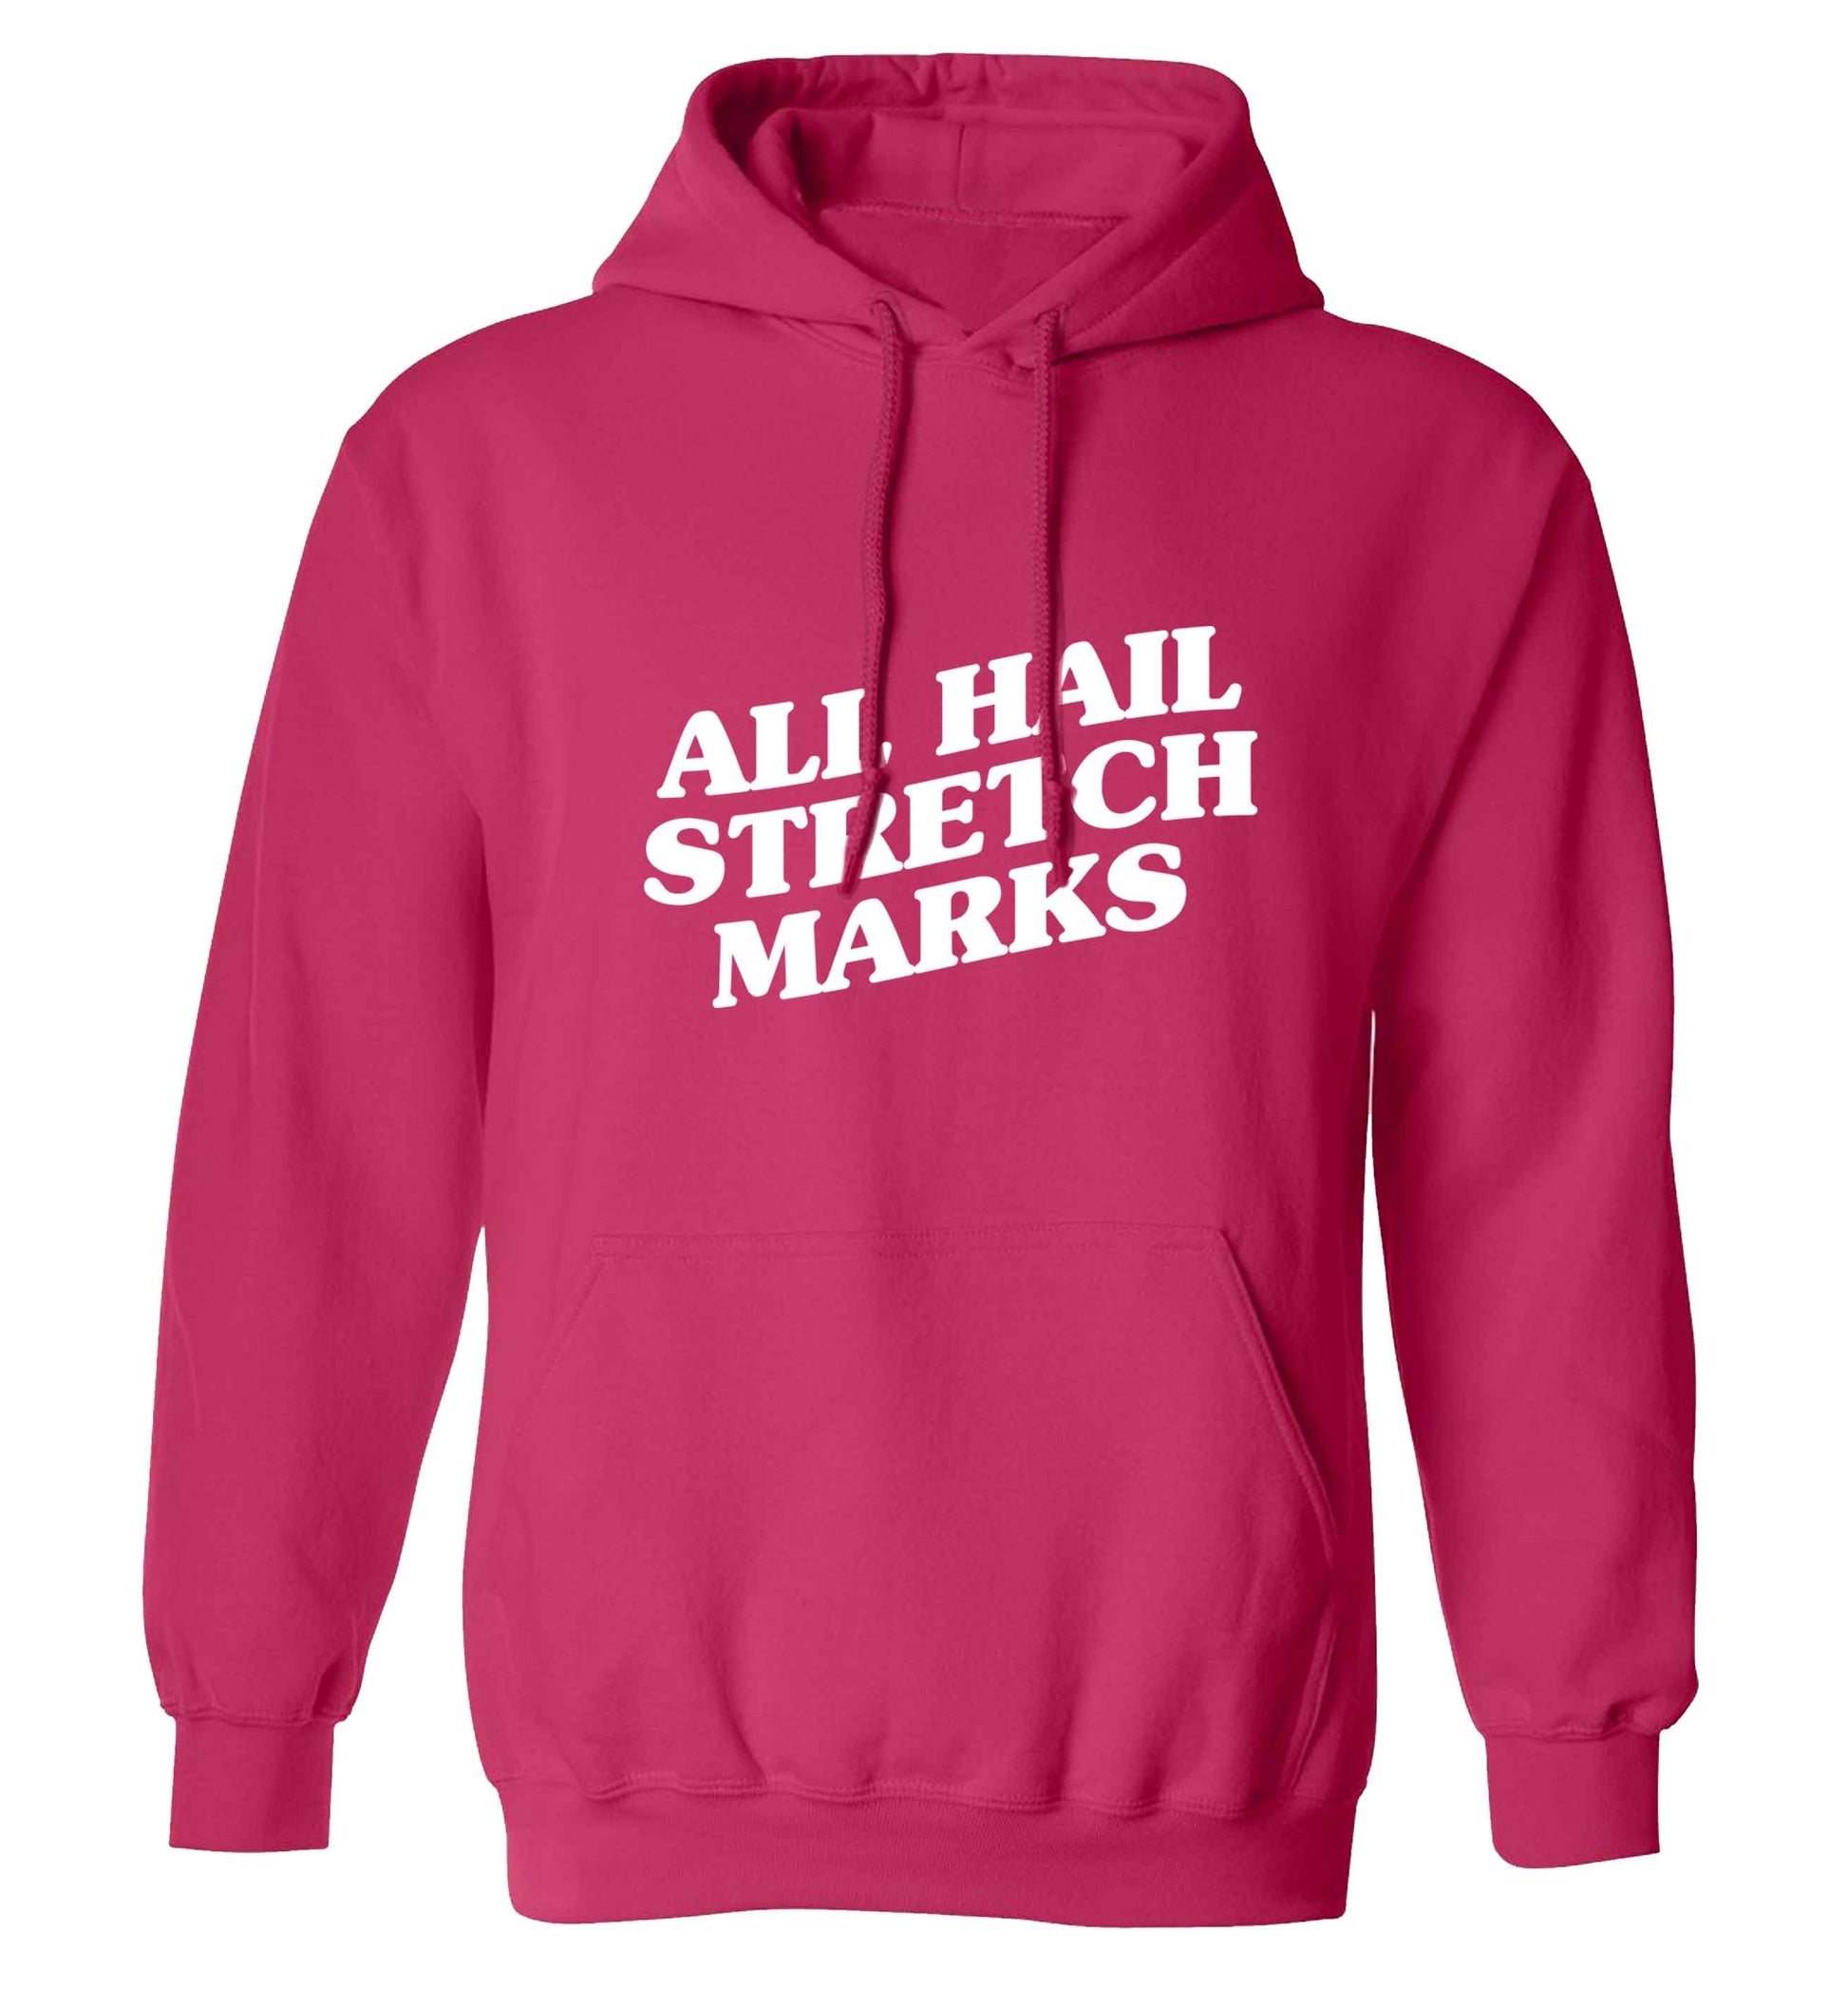 All hail stretch marks adults unisex pink hoodie 2XL